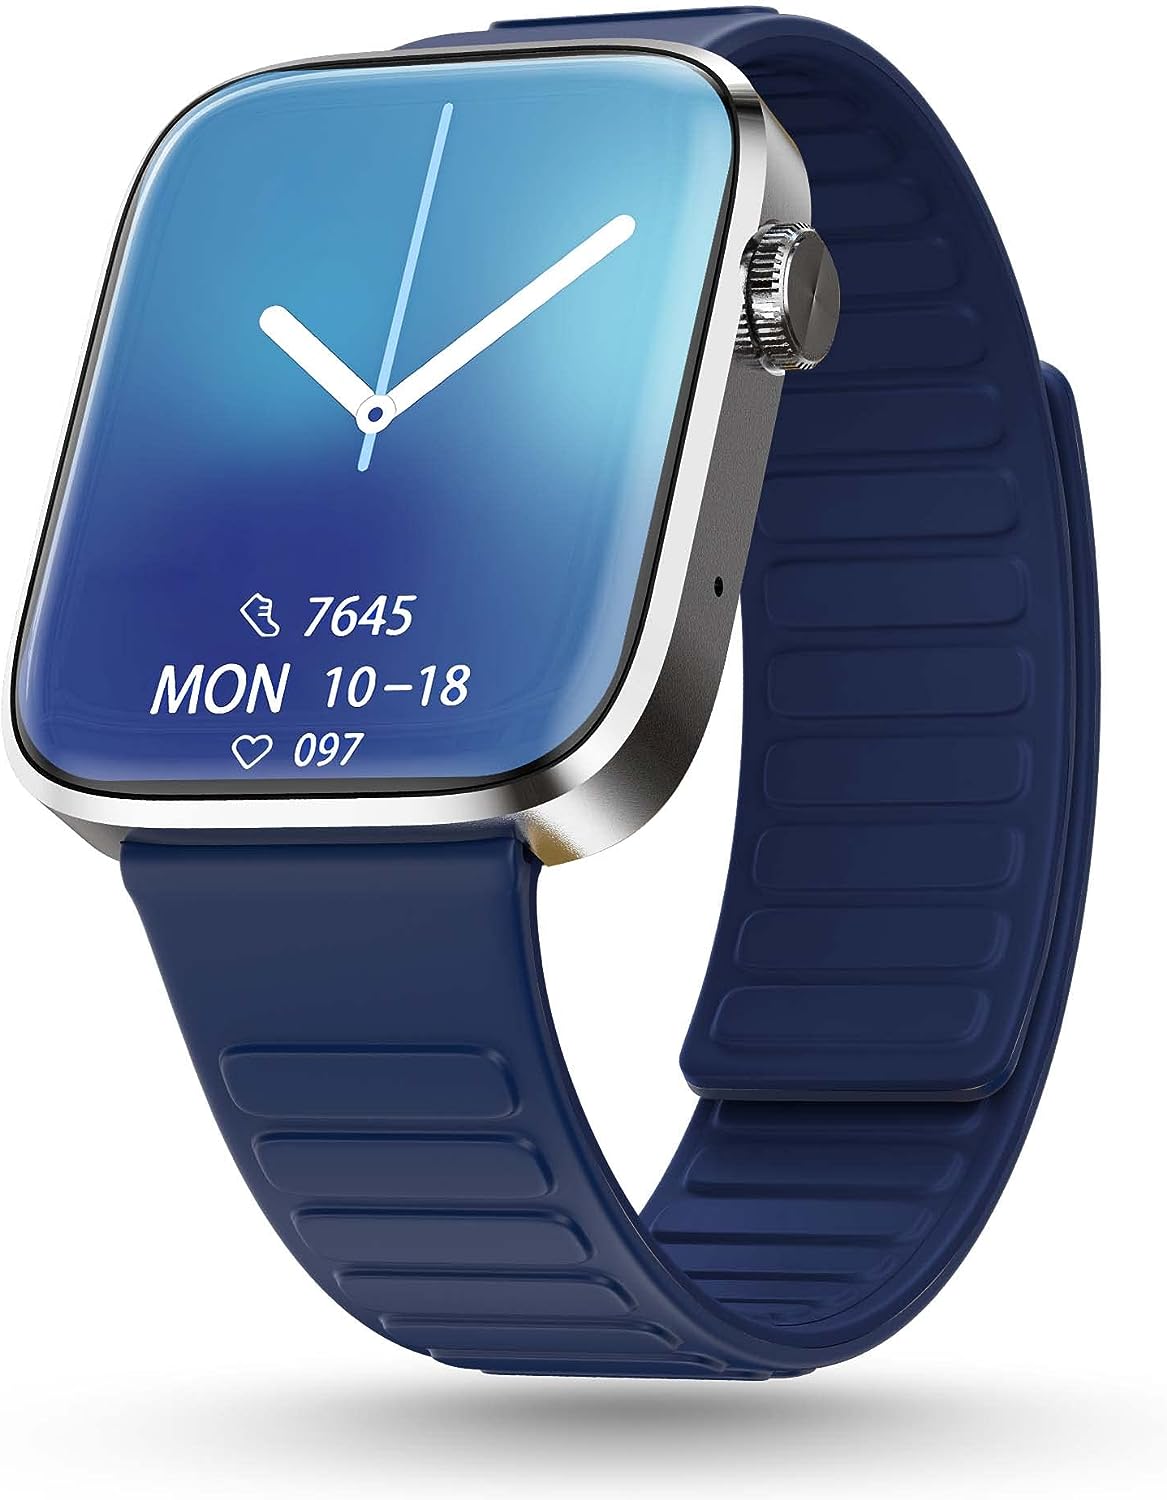 Newly Launched Pebble Cosmos Prime Bluetooth Calling Smart Watch,Largest 1.91" Bezel-less Edge-to-Edge Display,600 Nits Brightness,Sleek Metallic Body, Wireless Charging, Health Suite(Moon light Blue)